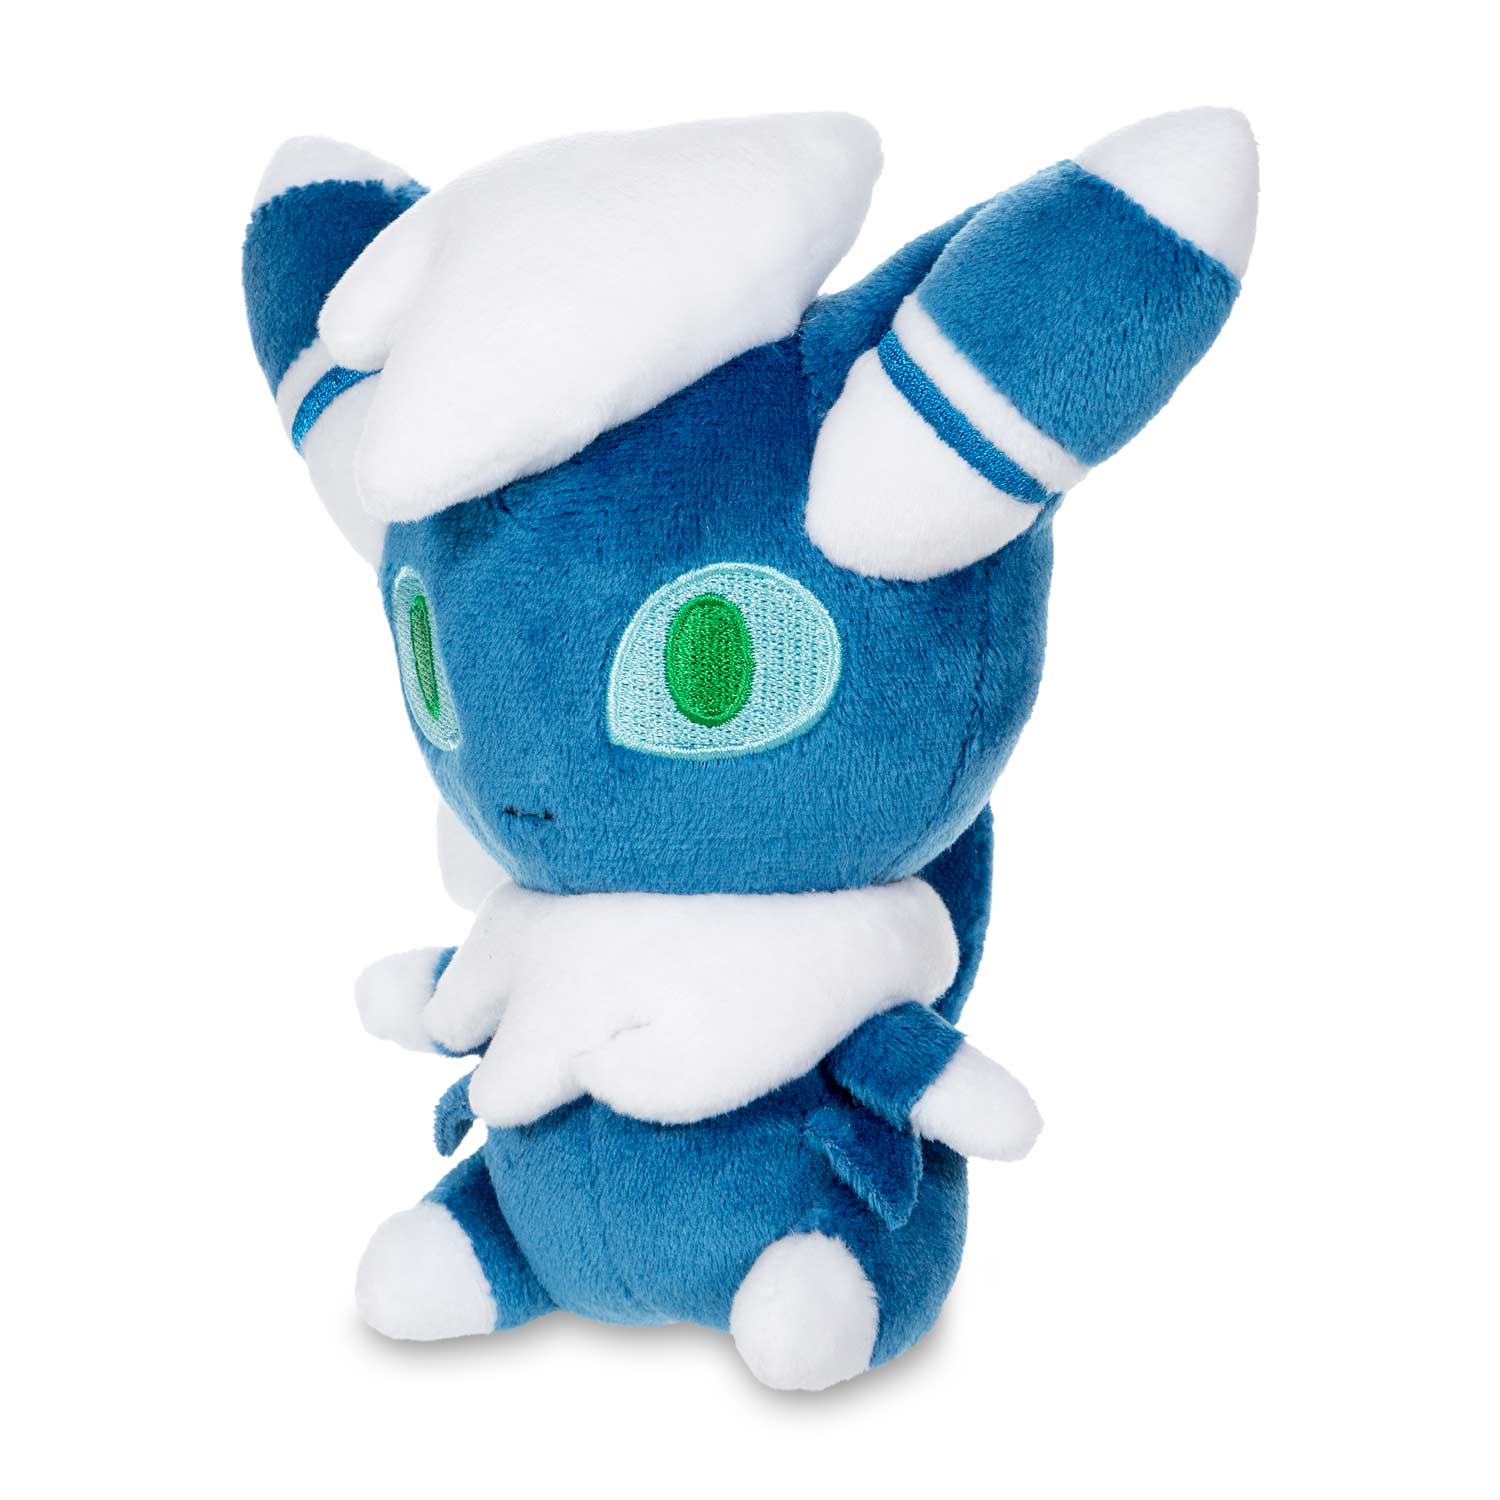 Male Meowstic Pokemon XY Plush Soft Toy Stuffed Animal Cat Doll From Espurr 6.5"